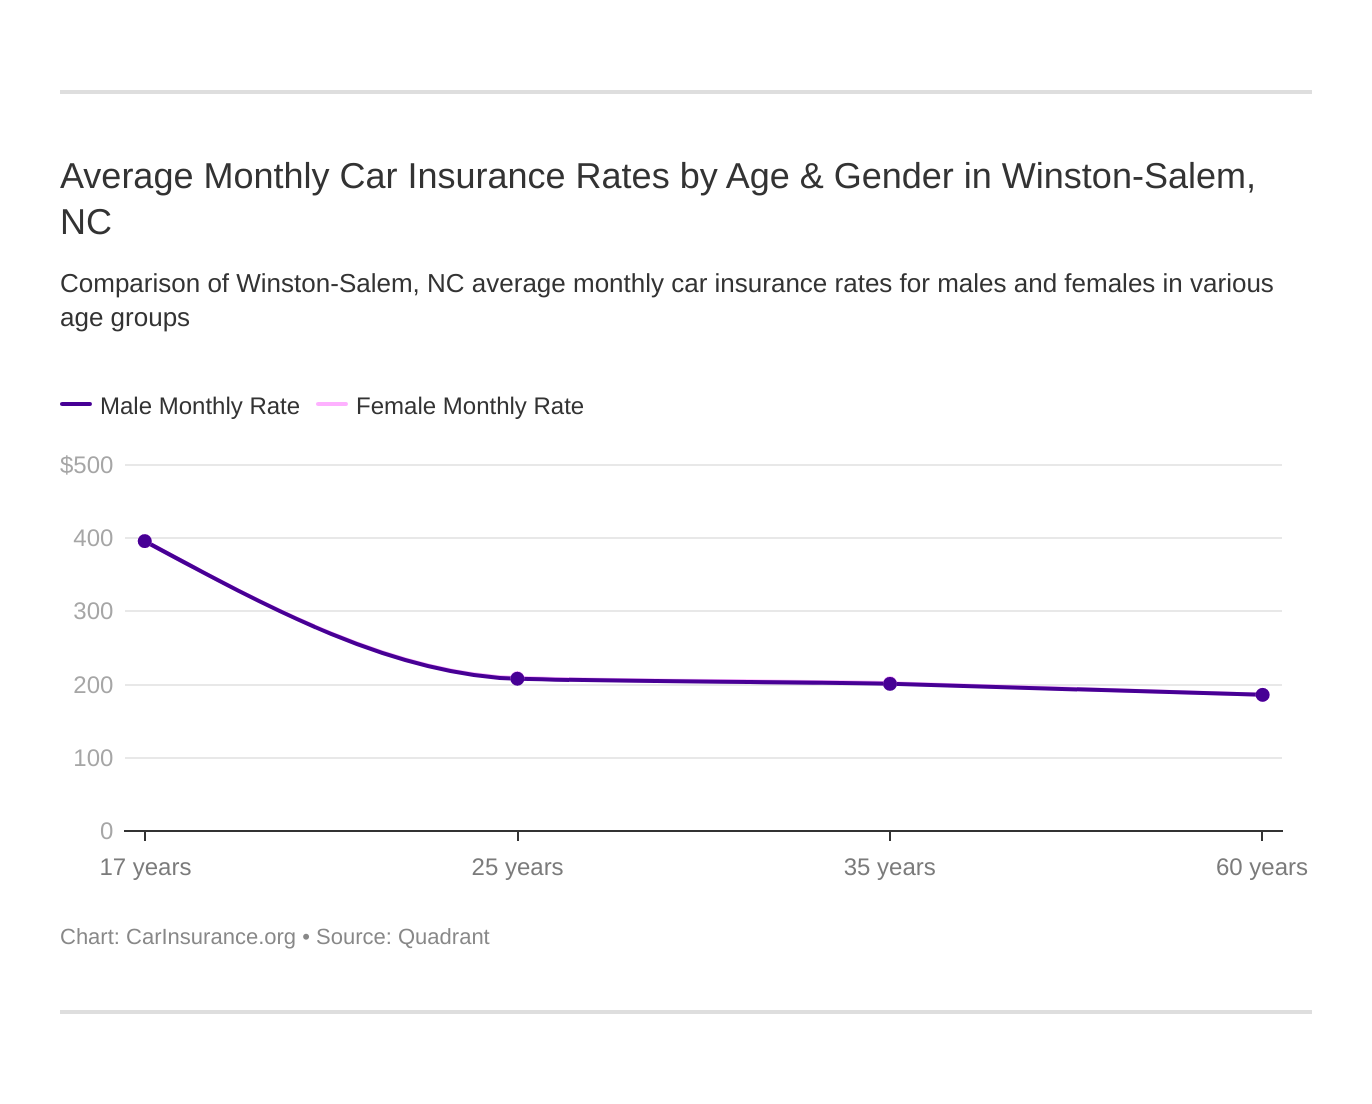 Average Monthly Car Insurance Rates by Age & Gender in Winston-Salem, NC